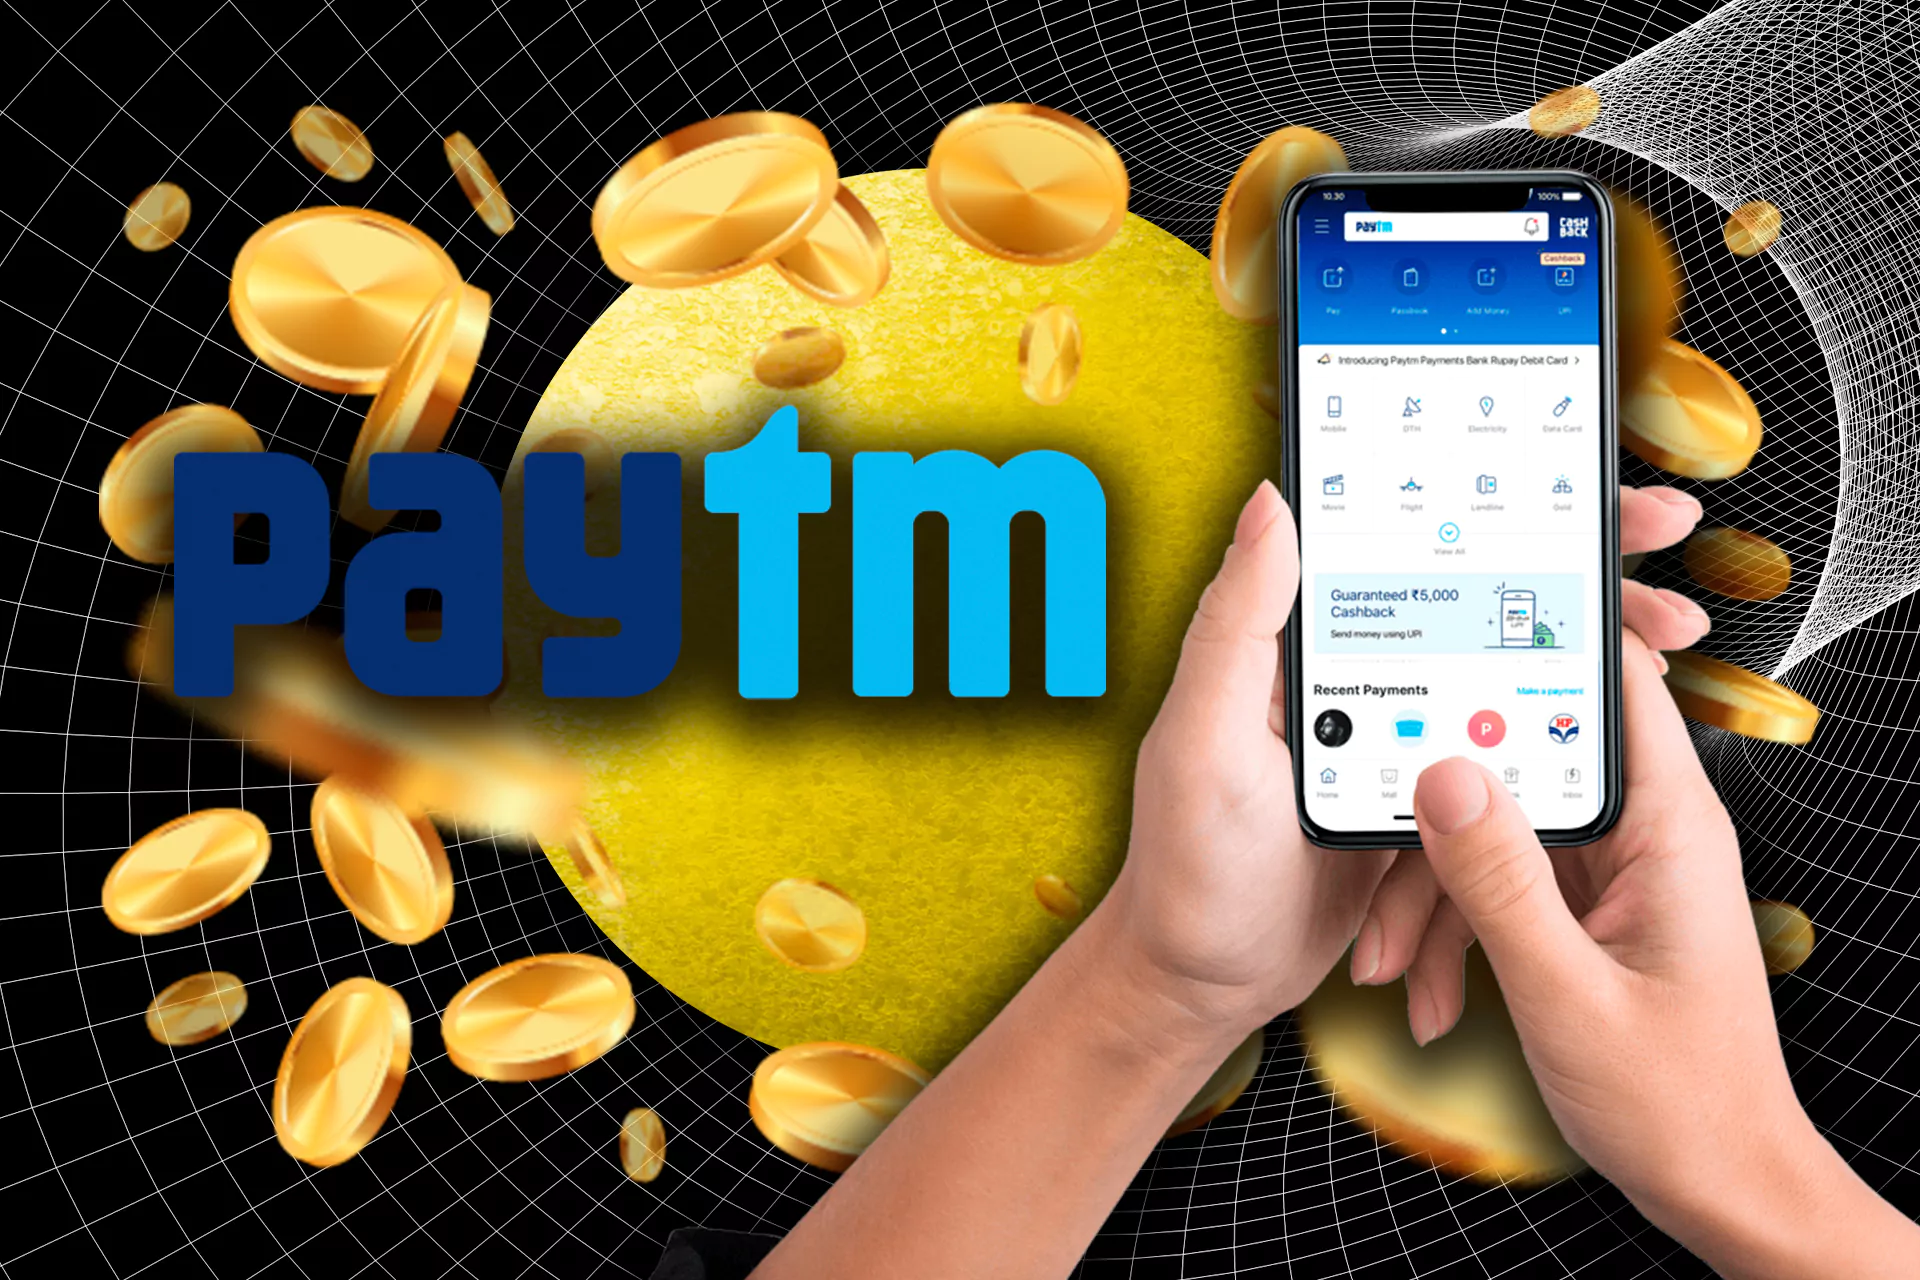 PayTM is one of the safest and most secure international e-wallets. It is regulated by the Reserve Bank of India. You don't have to have a bank account to fund your cricket betting account with it.